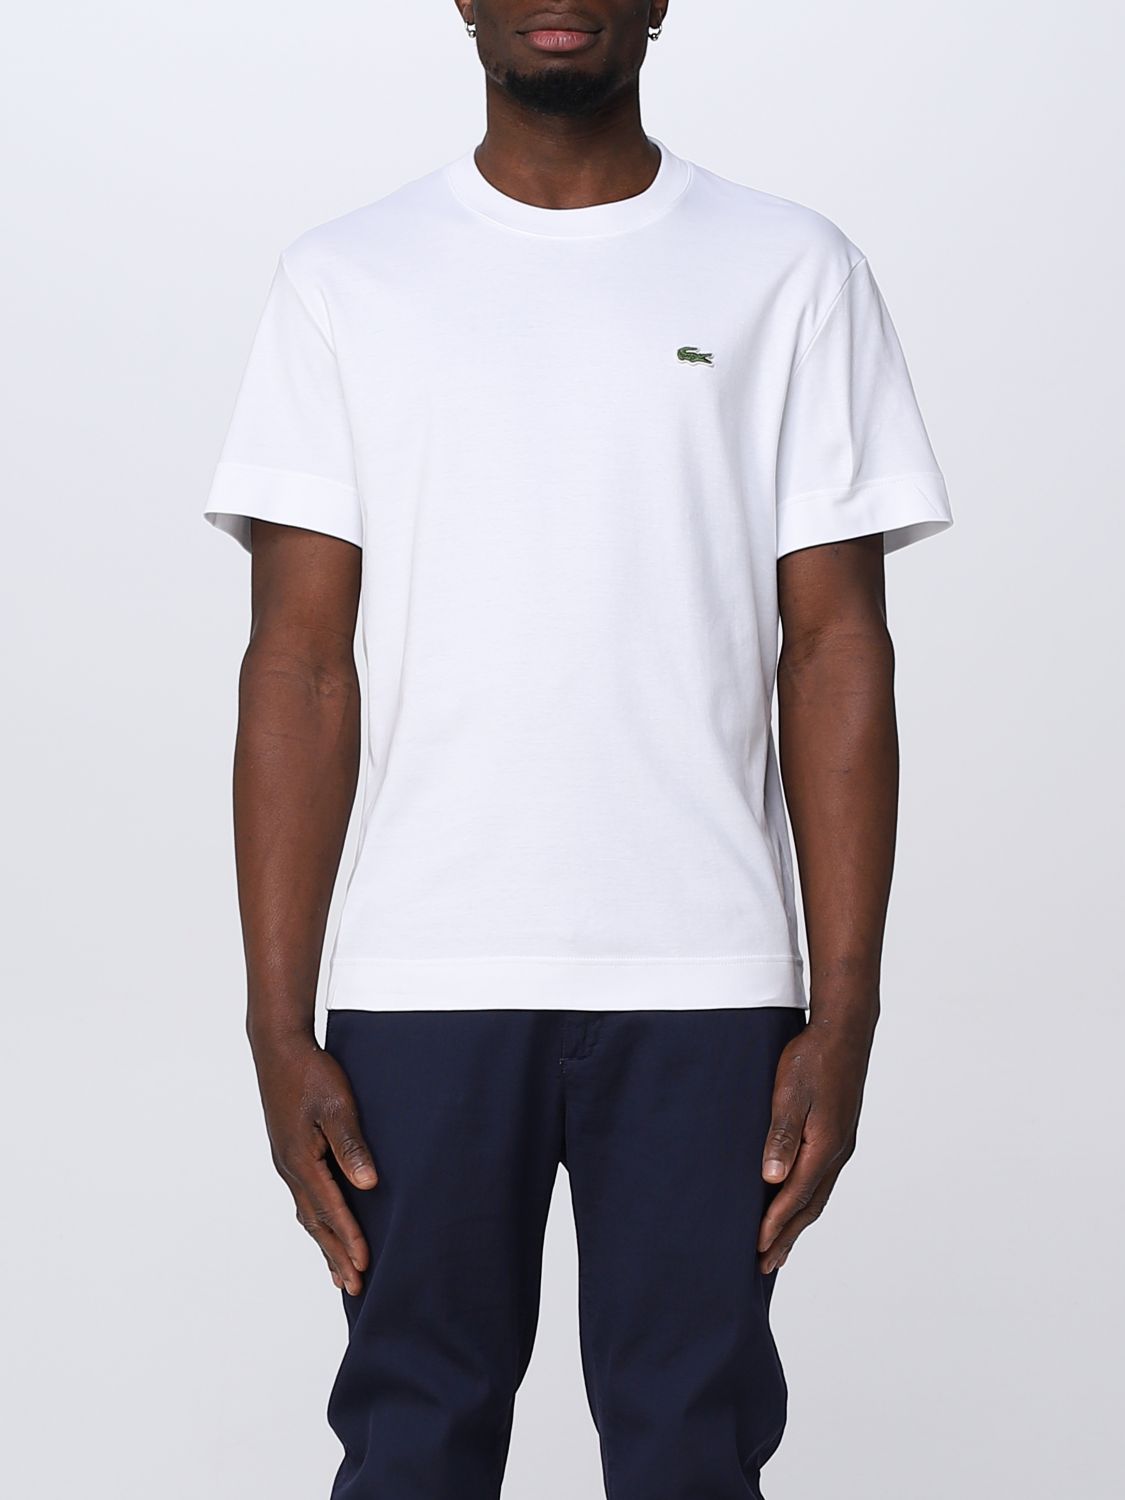 LACOSTE: t-shirt for man - White | Lacoste t-shirt TH1708 online at ...